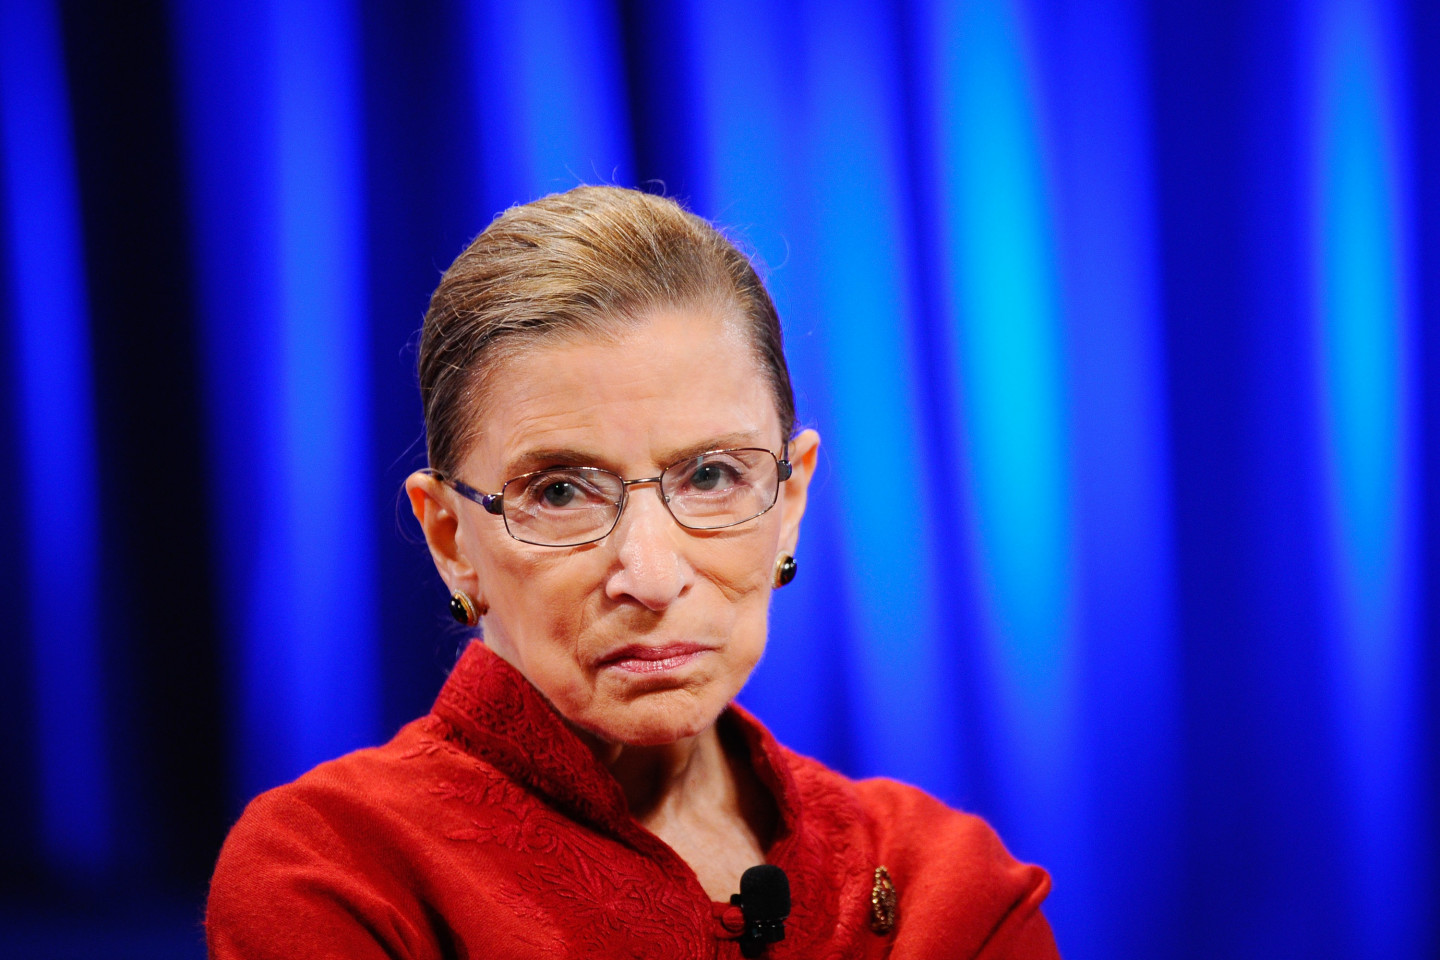 10 Ruth Bader Ginsburg Quotes That Show Why She’s the Notorious RBG